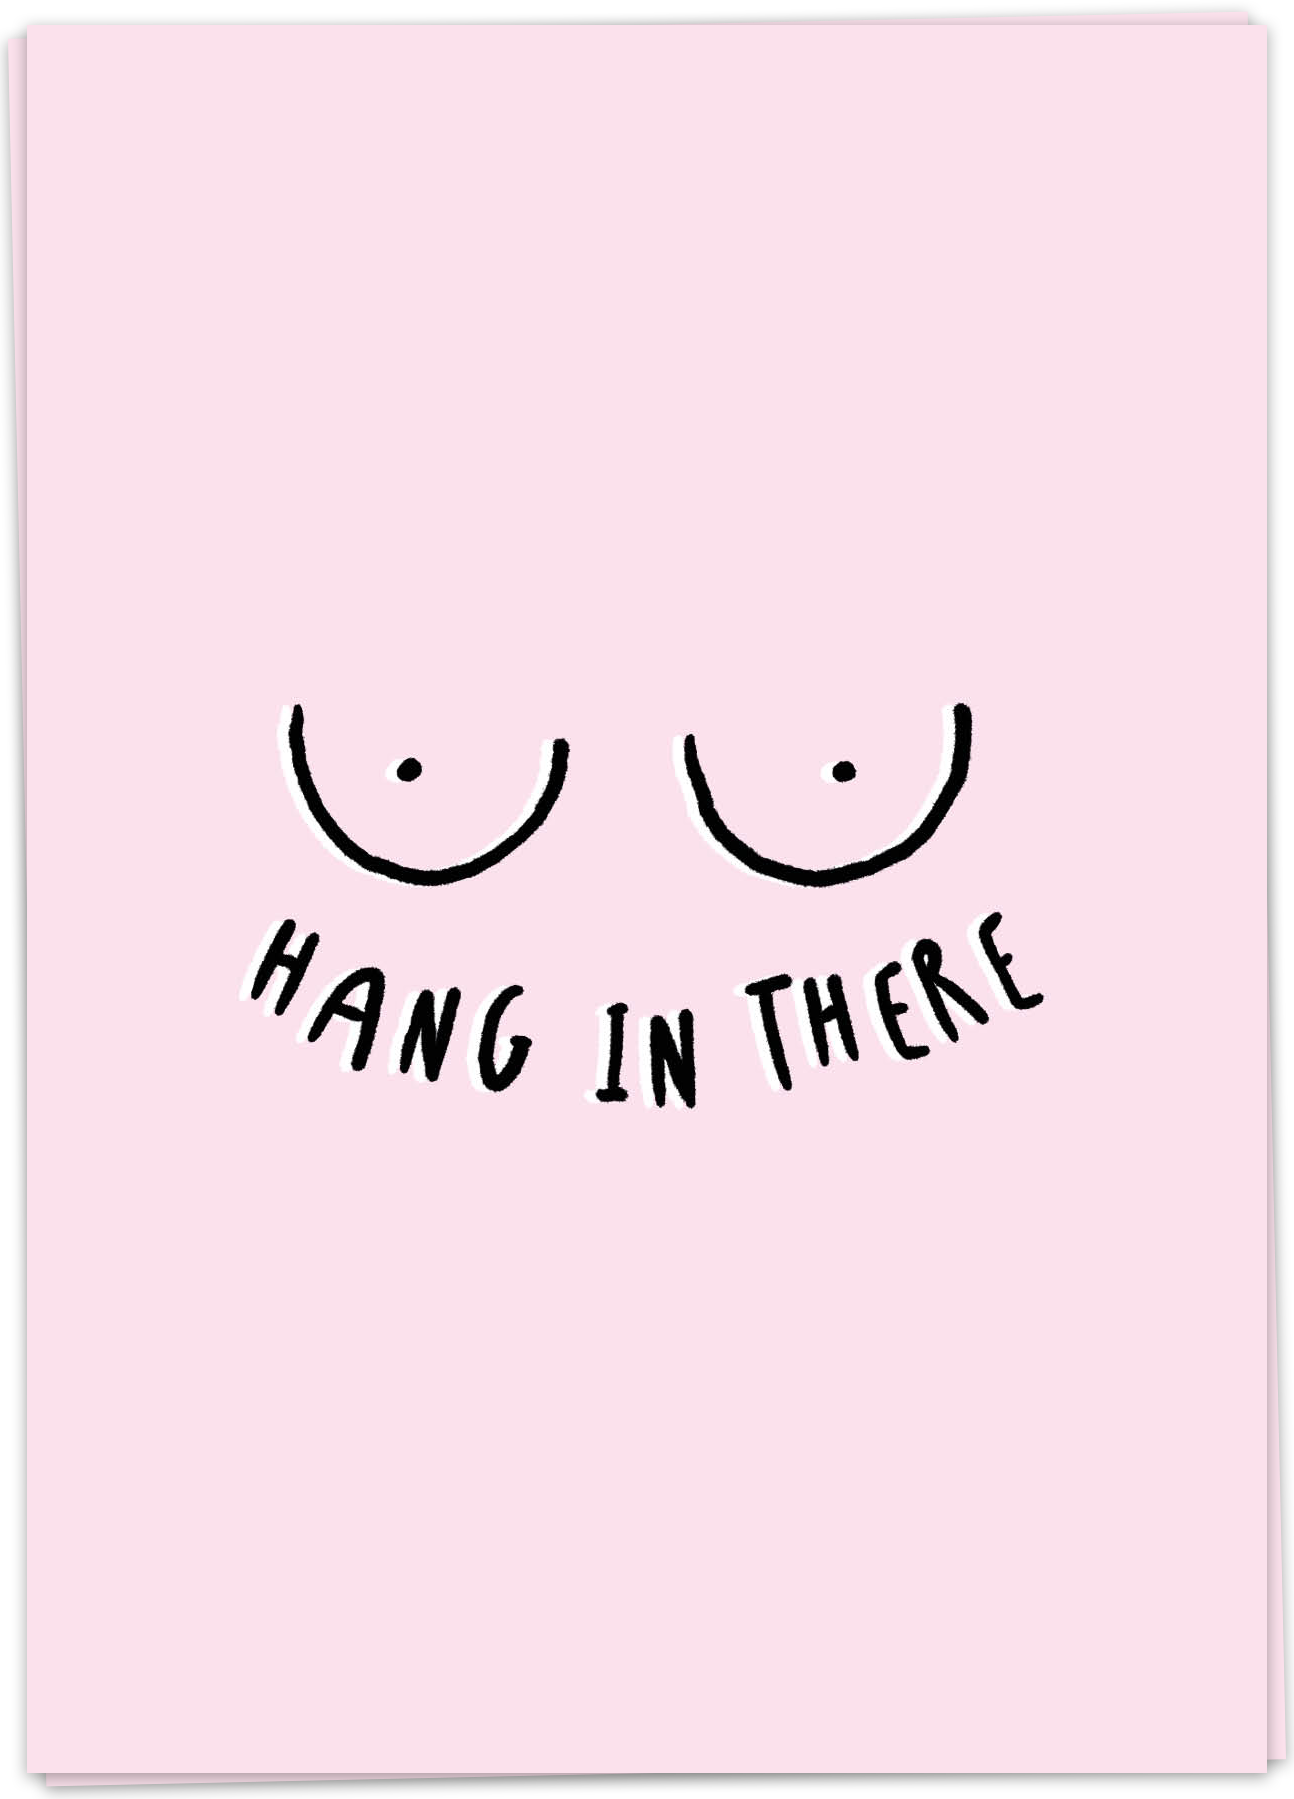 Hang in there (boobs) – The Other Shop